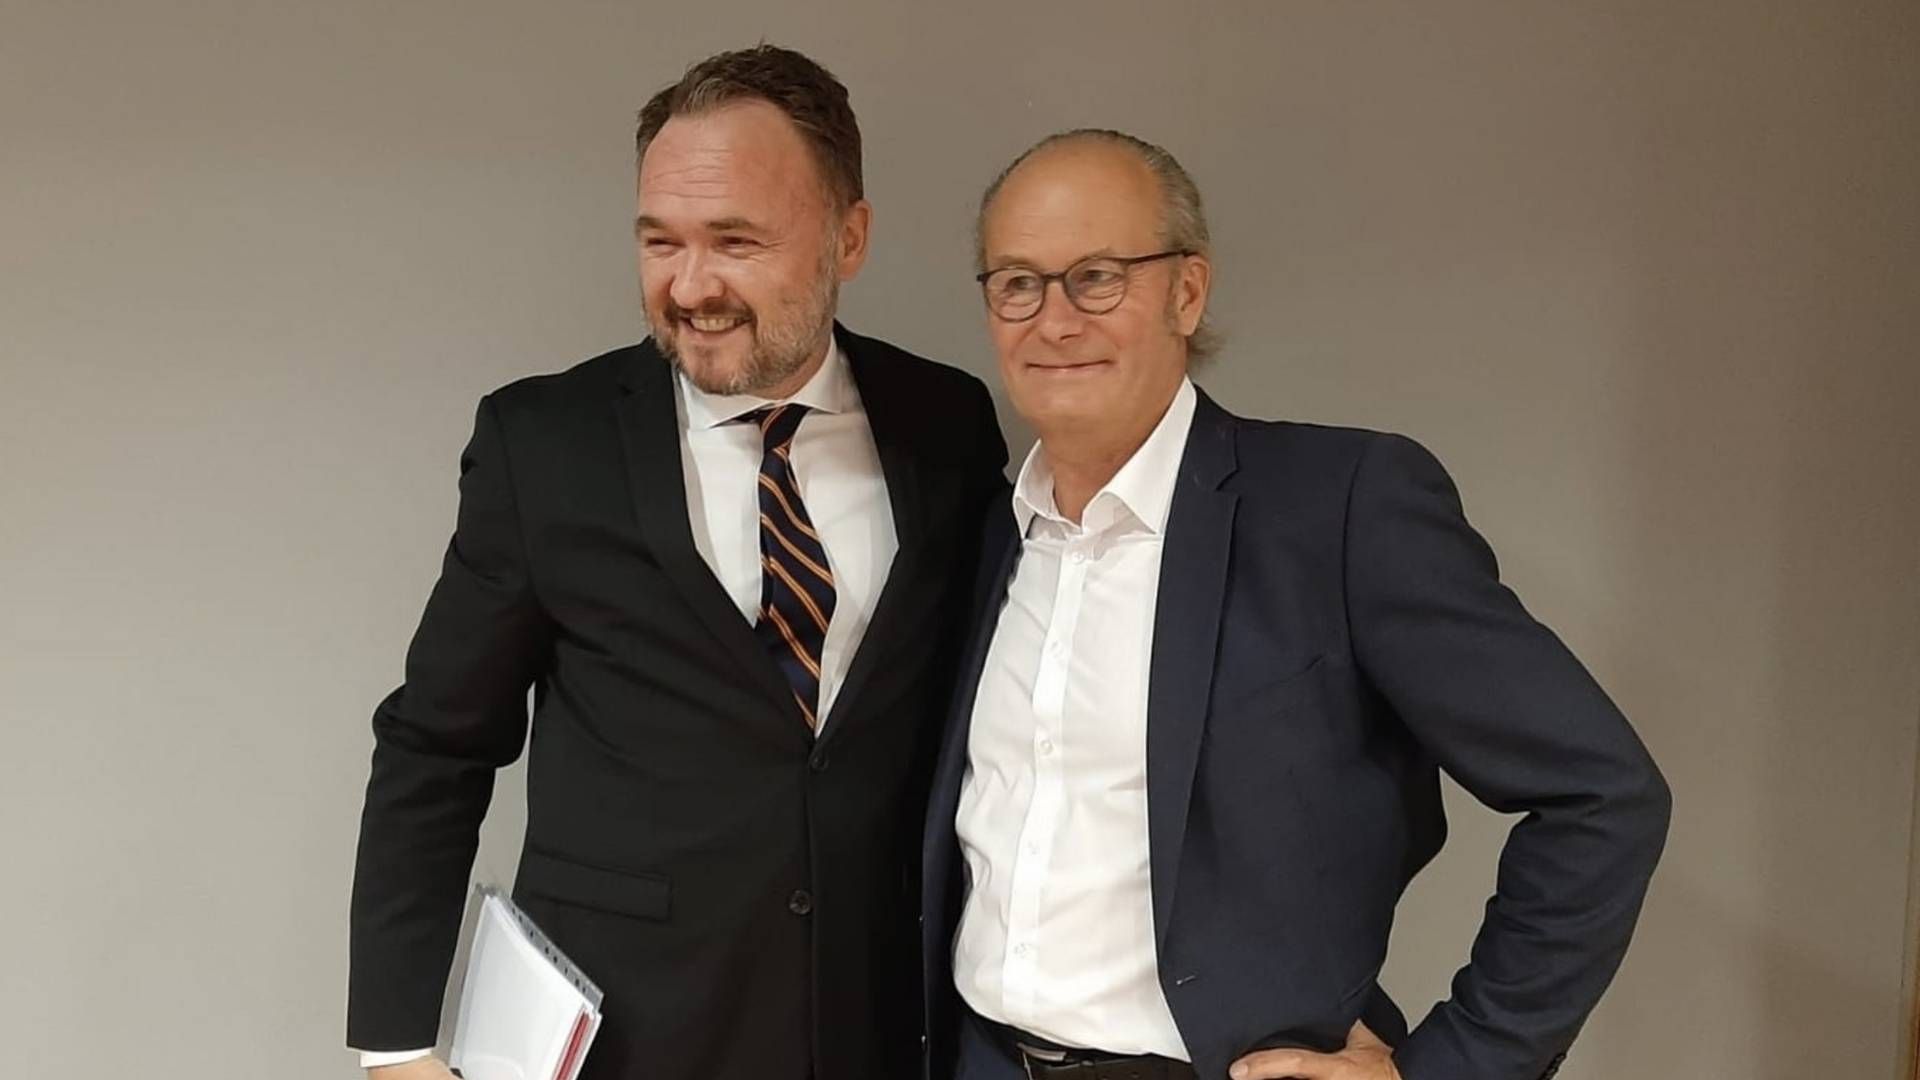 Minister of Climate, Energy and Utilities Dan Jørgensen put his signature on the agreement together with his Luxembourgian counterpart, Claude Turmes. | Photo: Le Gouvernement Luxembourgeois